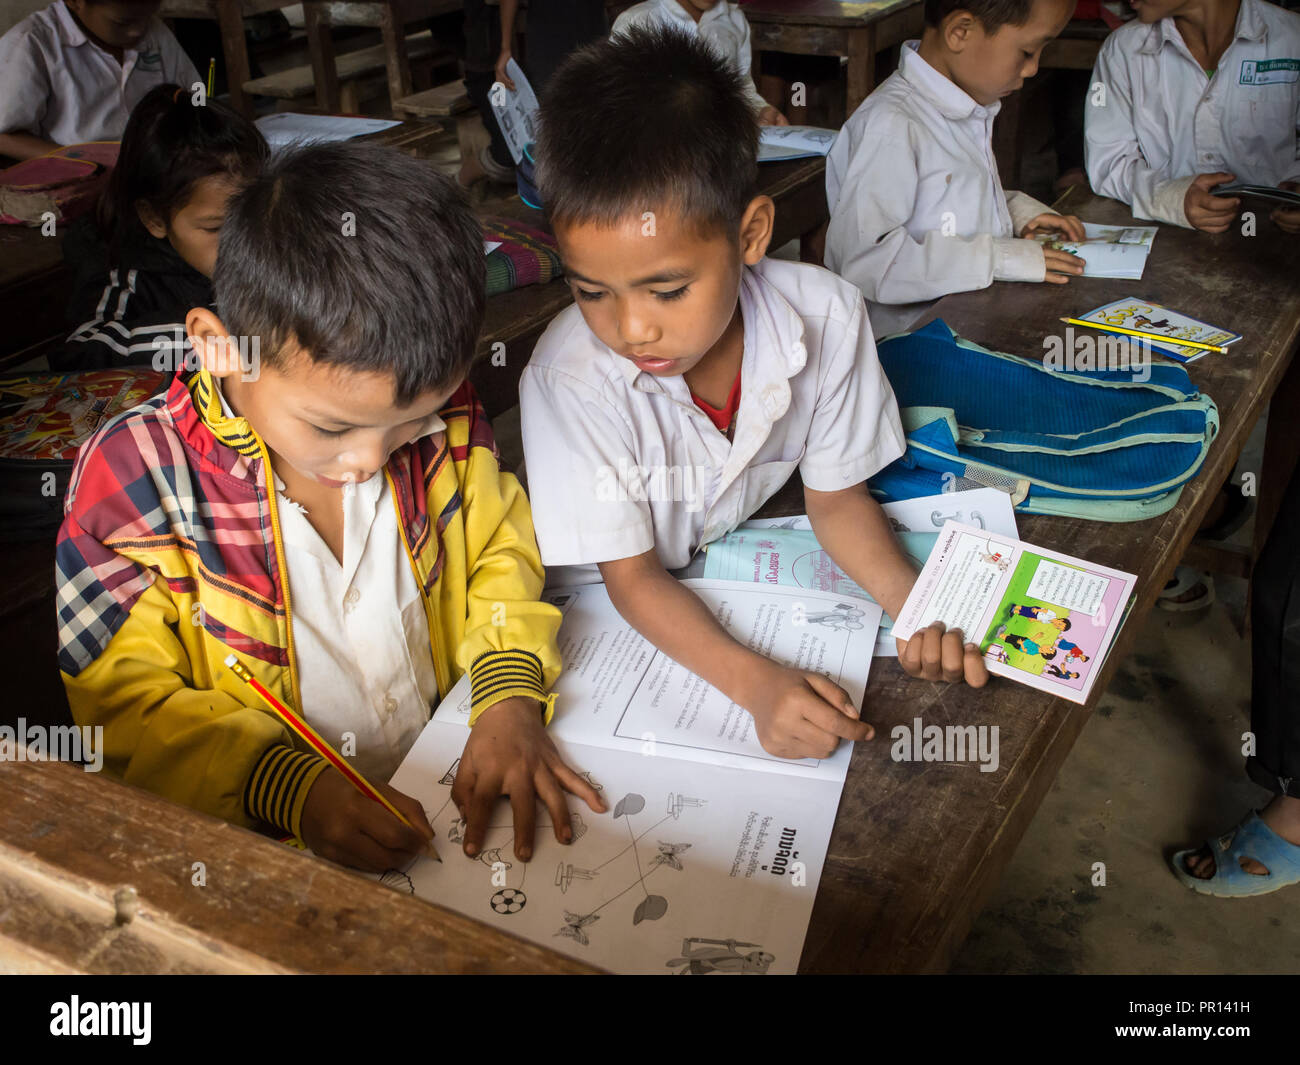 Young boys in school classroom, Houy Mieng, Laos, Indochina, Southeast Asia, Asia Stock Photo